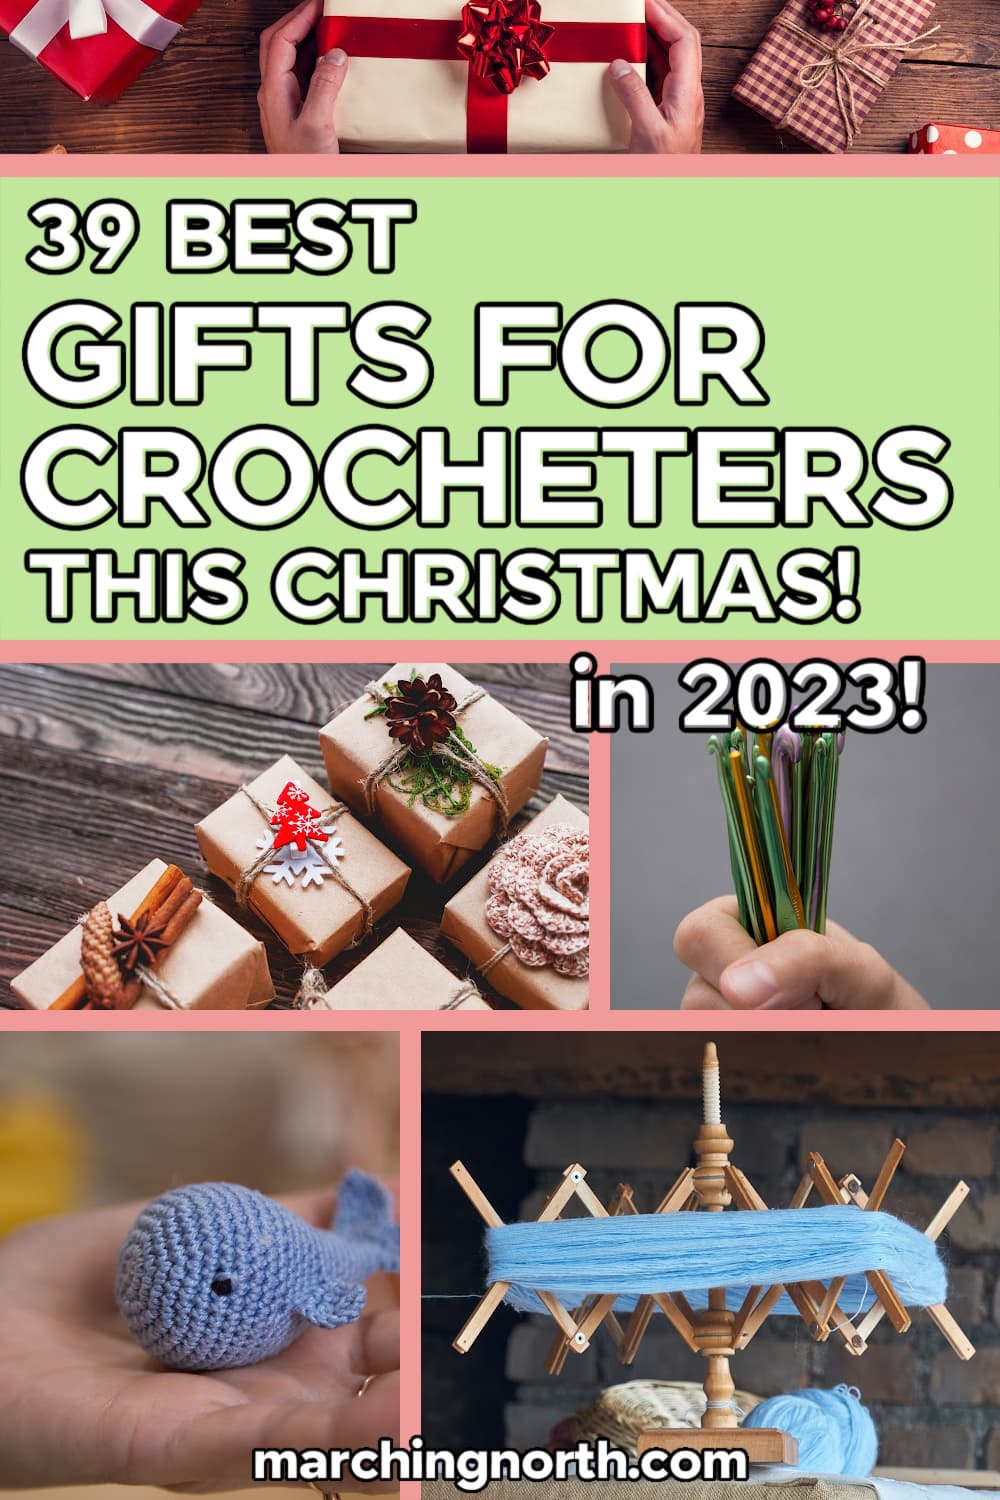 5+ Gifts For Crocheters